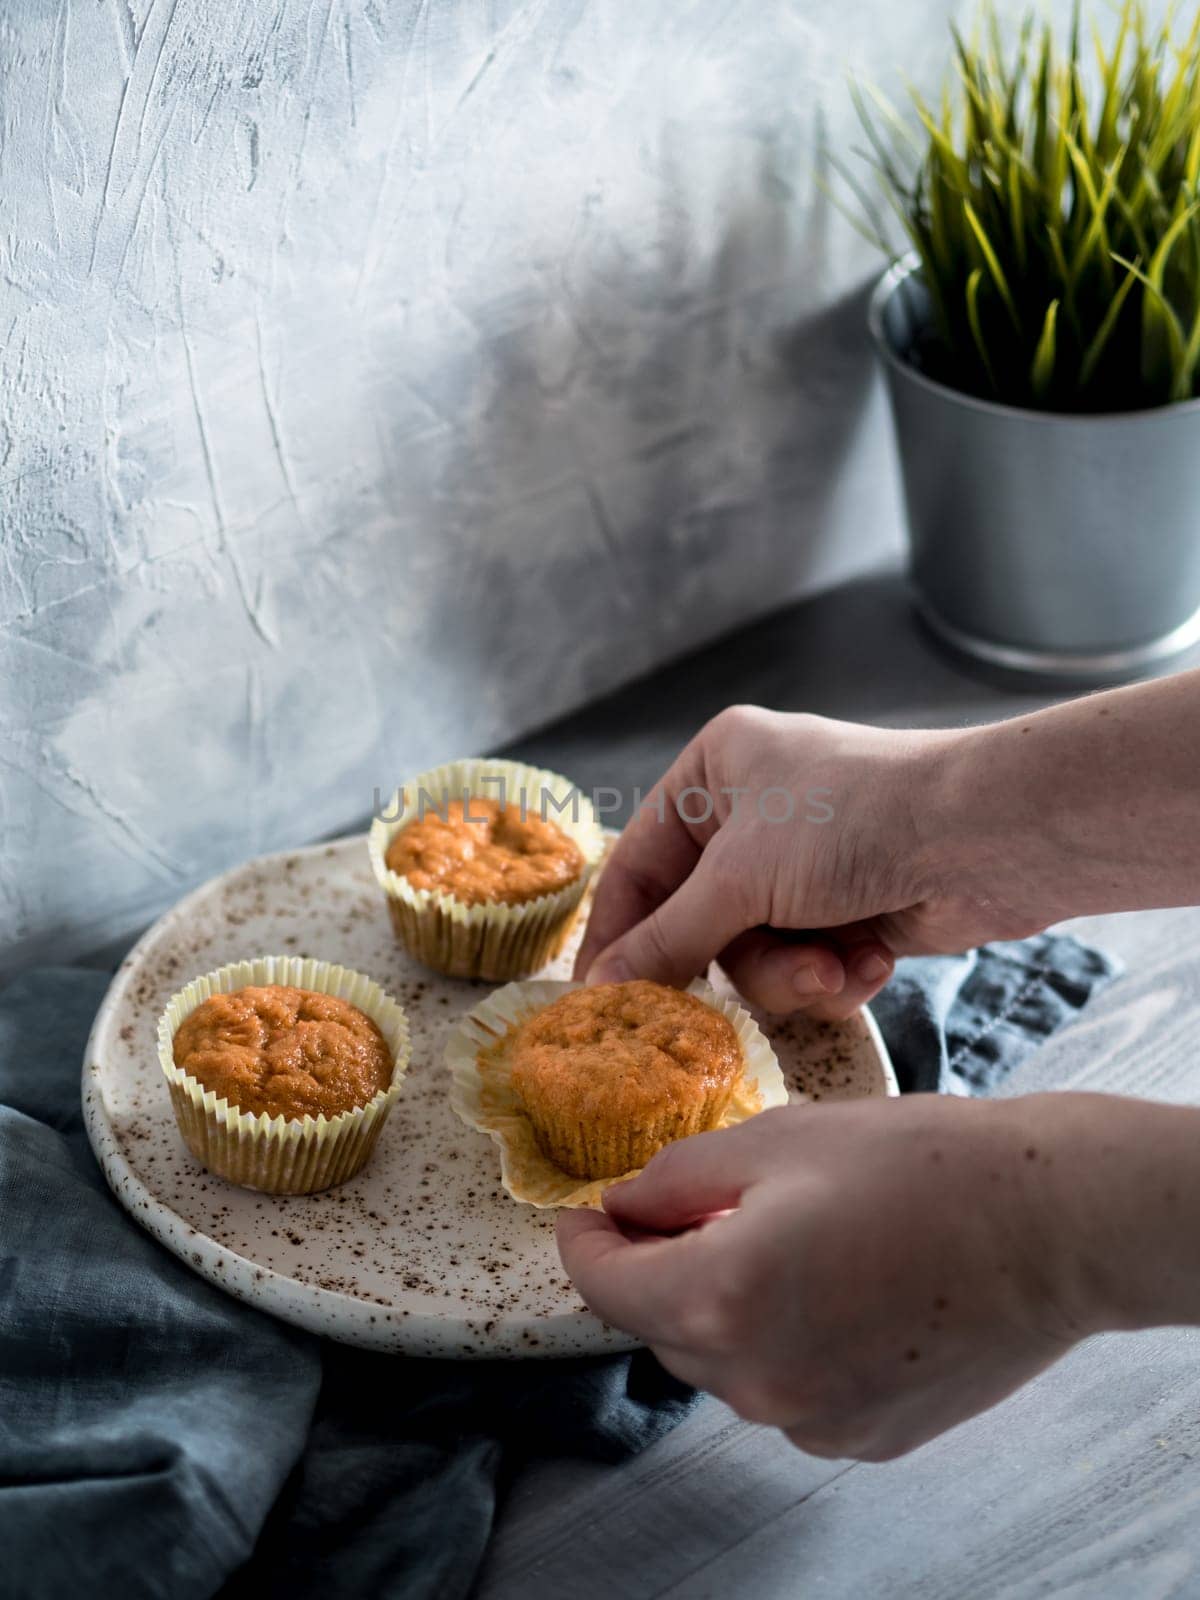 Homemade muffins on craft plate over gray wooden table. Hands hold carrot cupcake. Copy space. Toned image in scandinavian style.